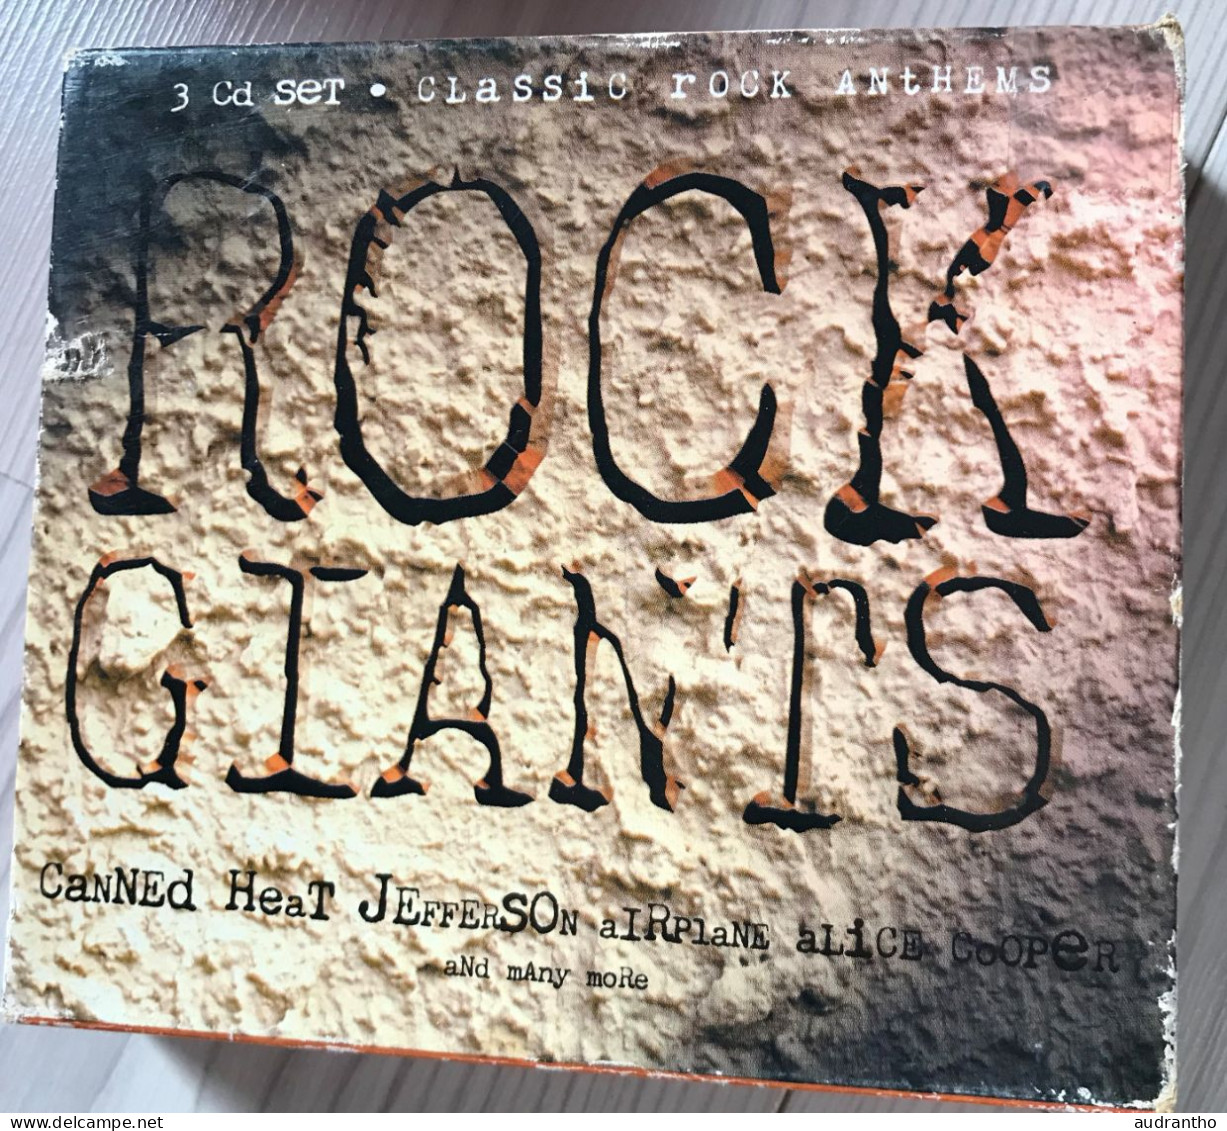 Rare Coffret 3 CD CLASSIC ROCK ATHENS ROCK GIANTS 1997 - Other - English Music